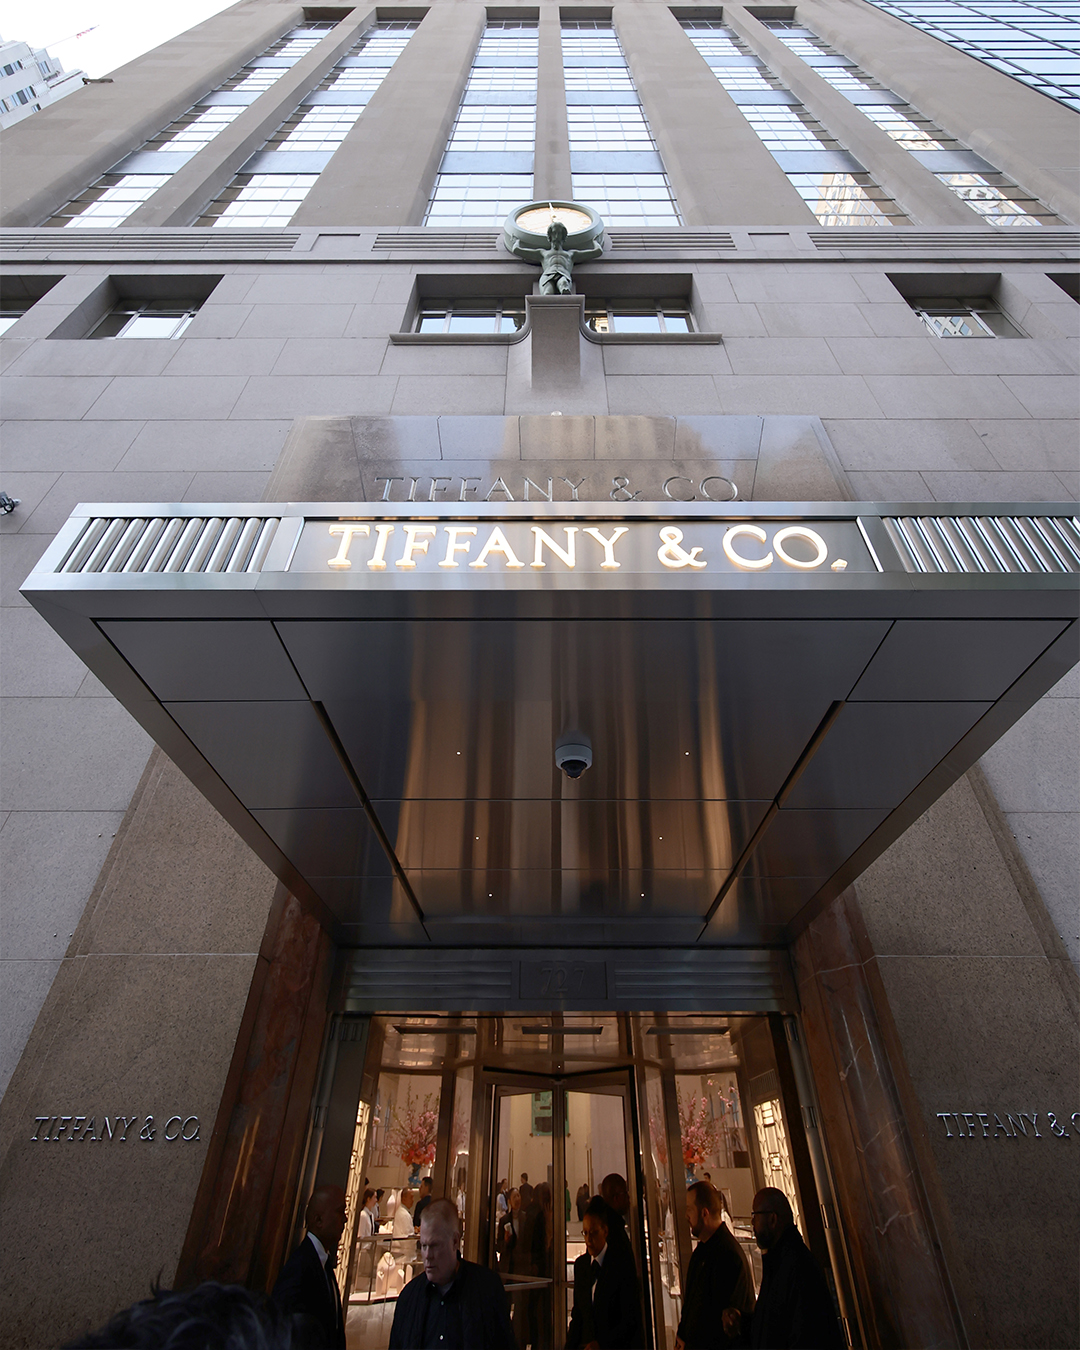 Tiffany & Co's Landmark Opens on Fifth Avenue, Sparkling In